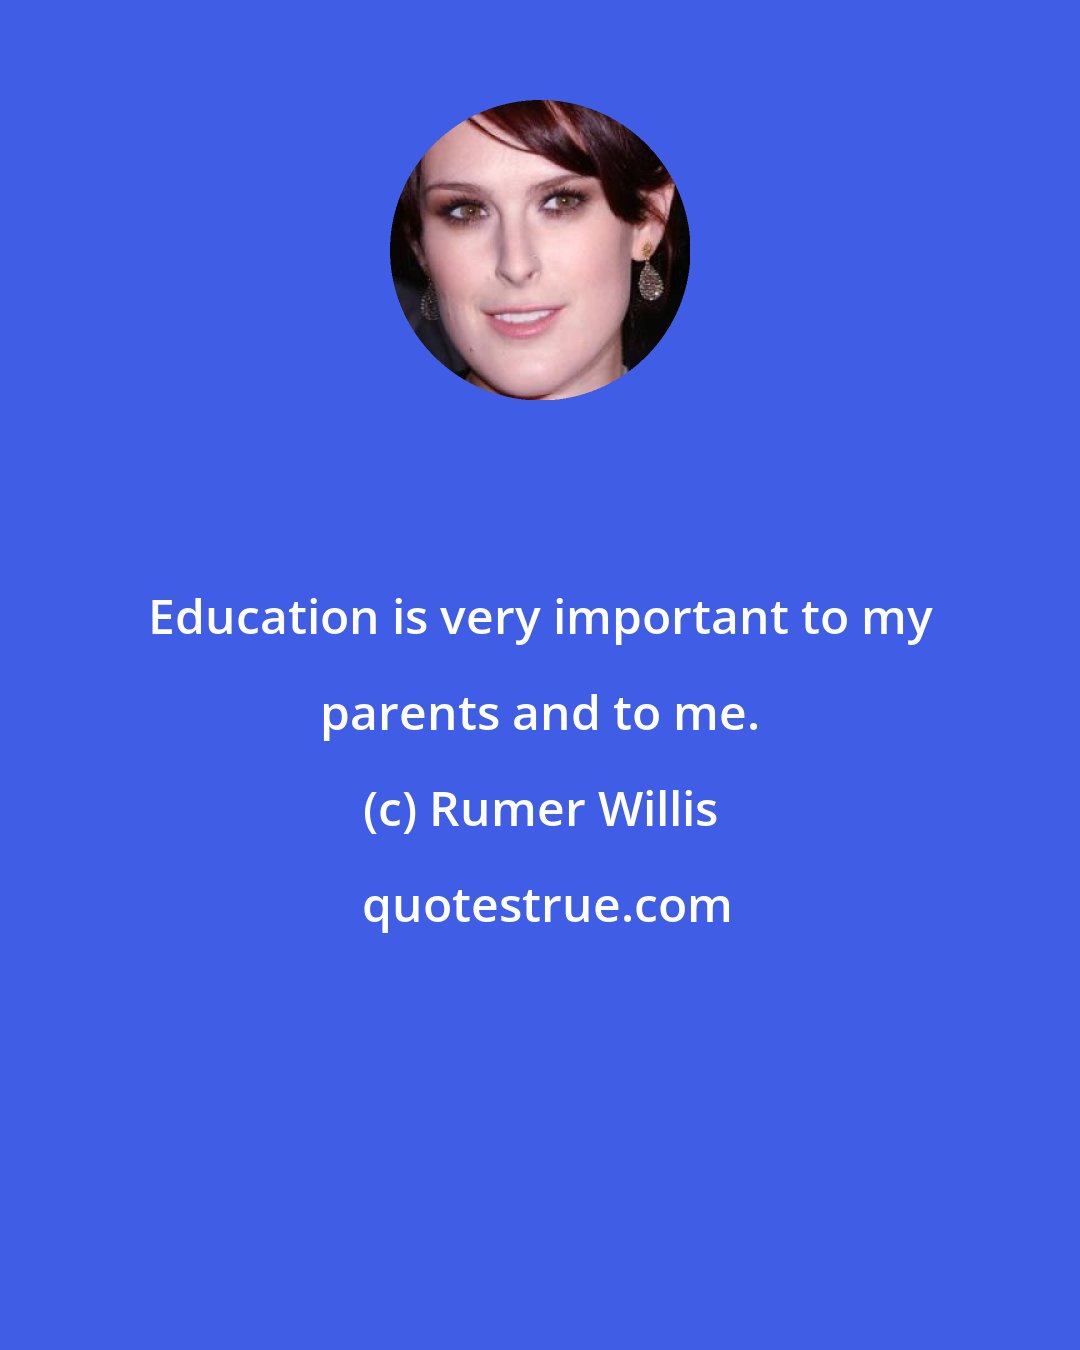 Rumer Willis: Education is very important to my parents and to me.